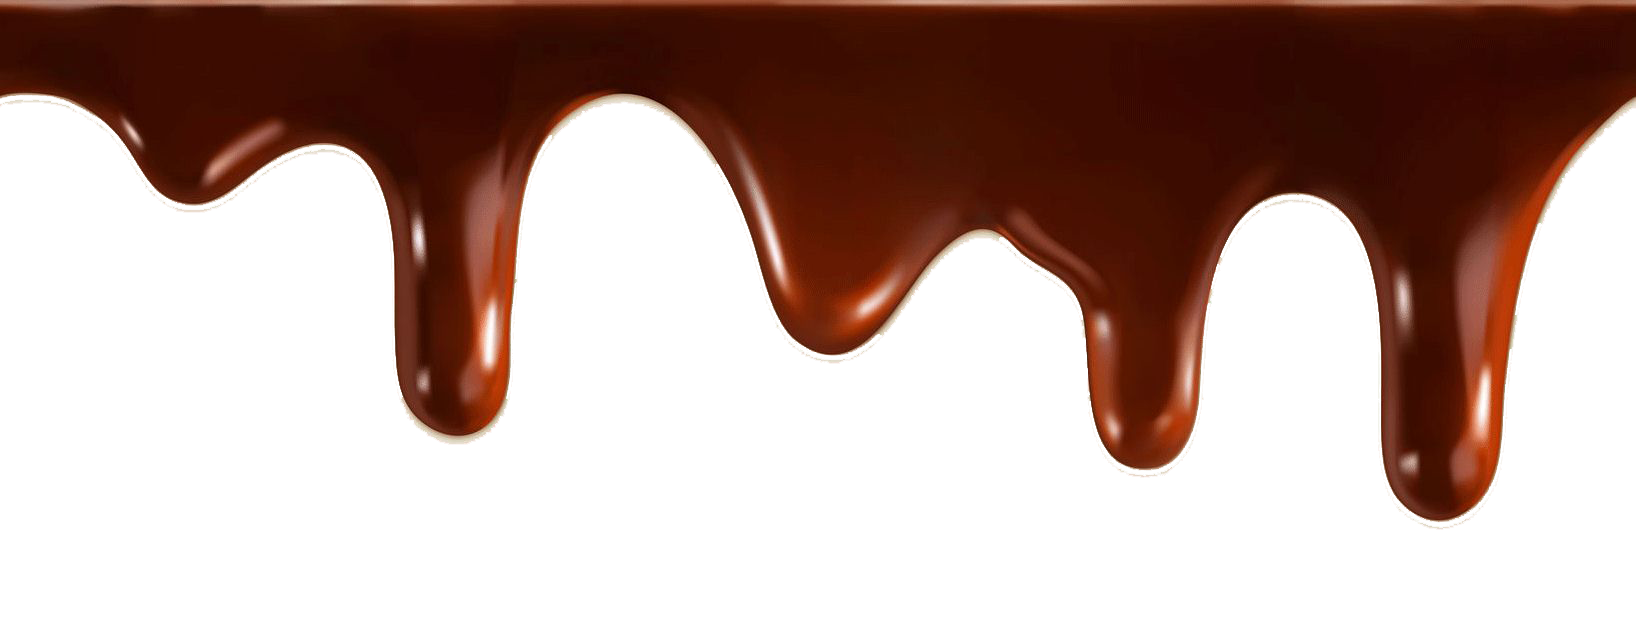 Chocolate PNG-PlusPNG.com-146